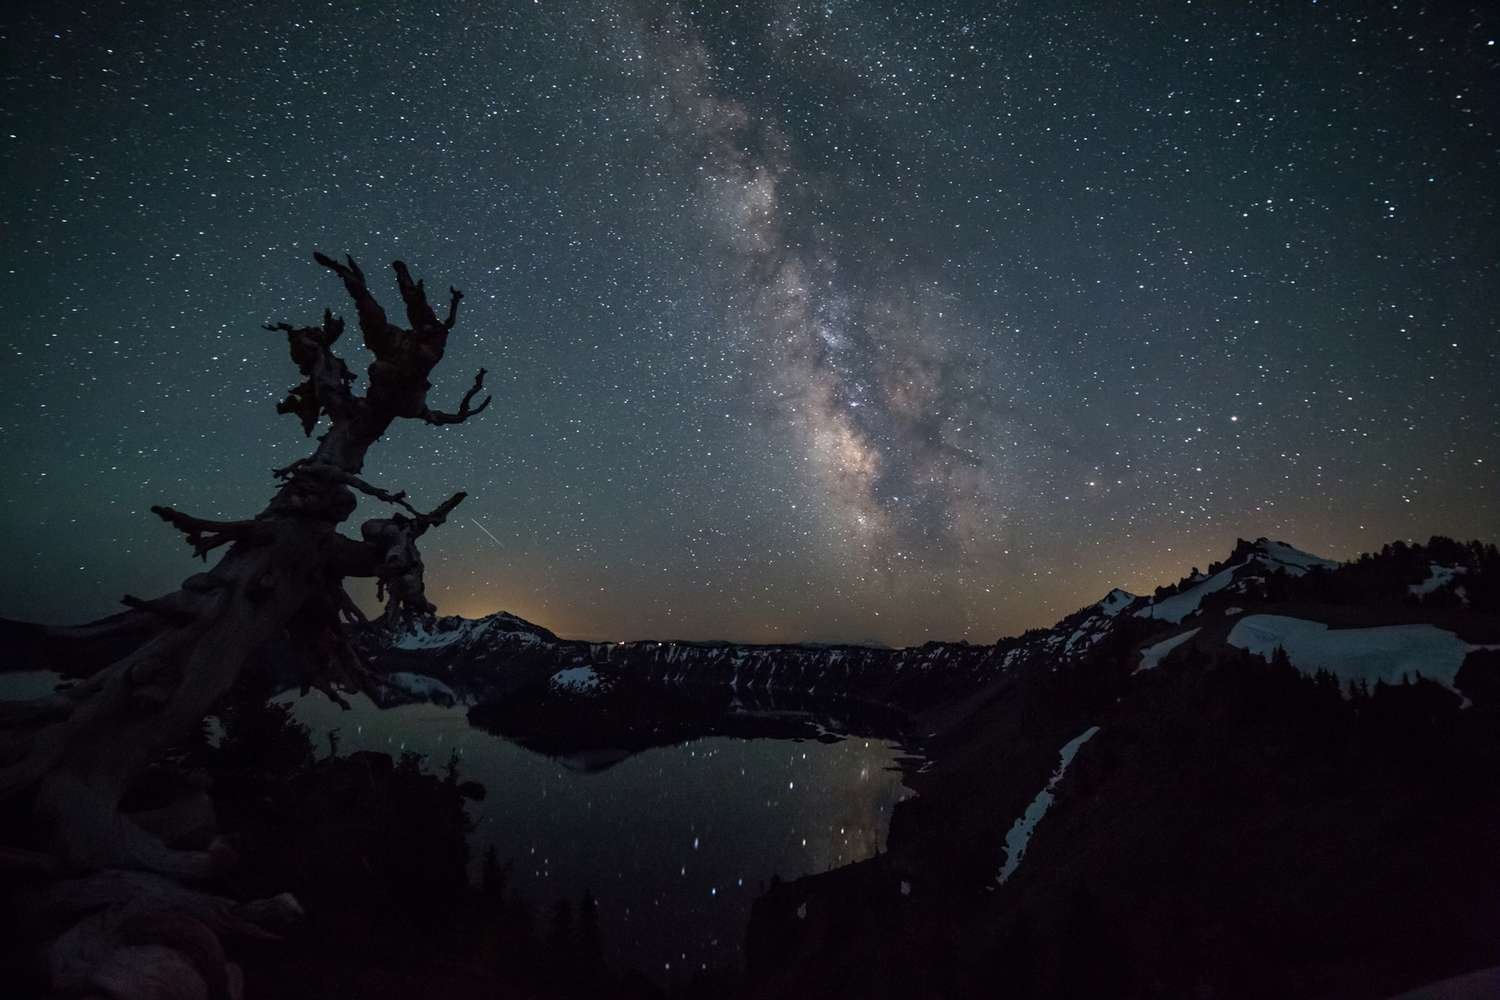 10 Best National Parks in the U.S. for Stargazing